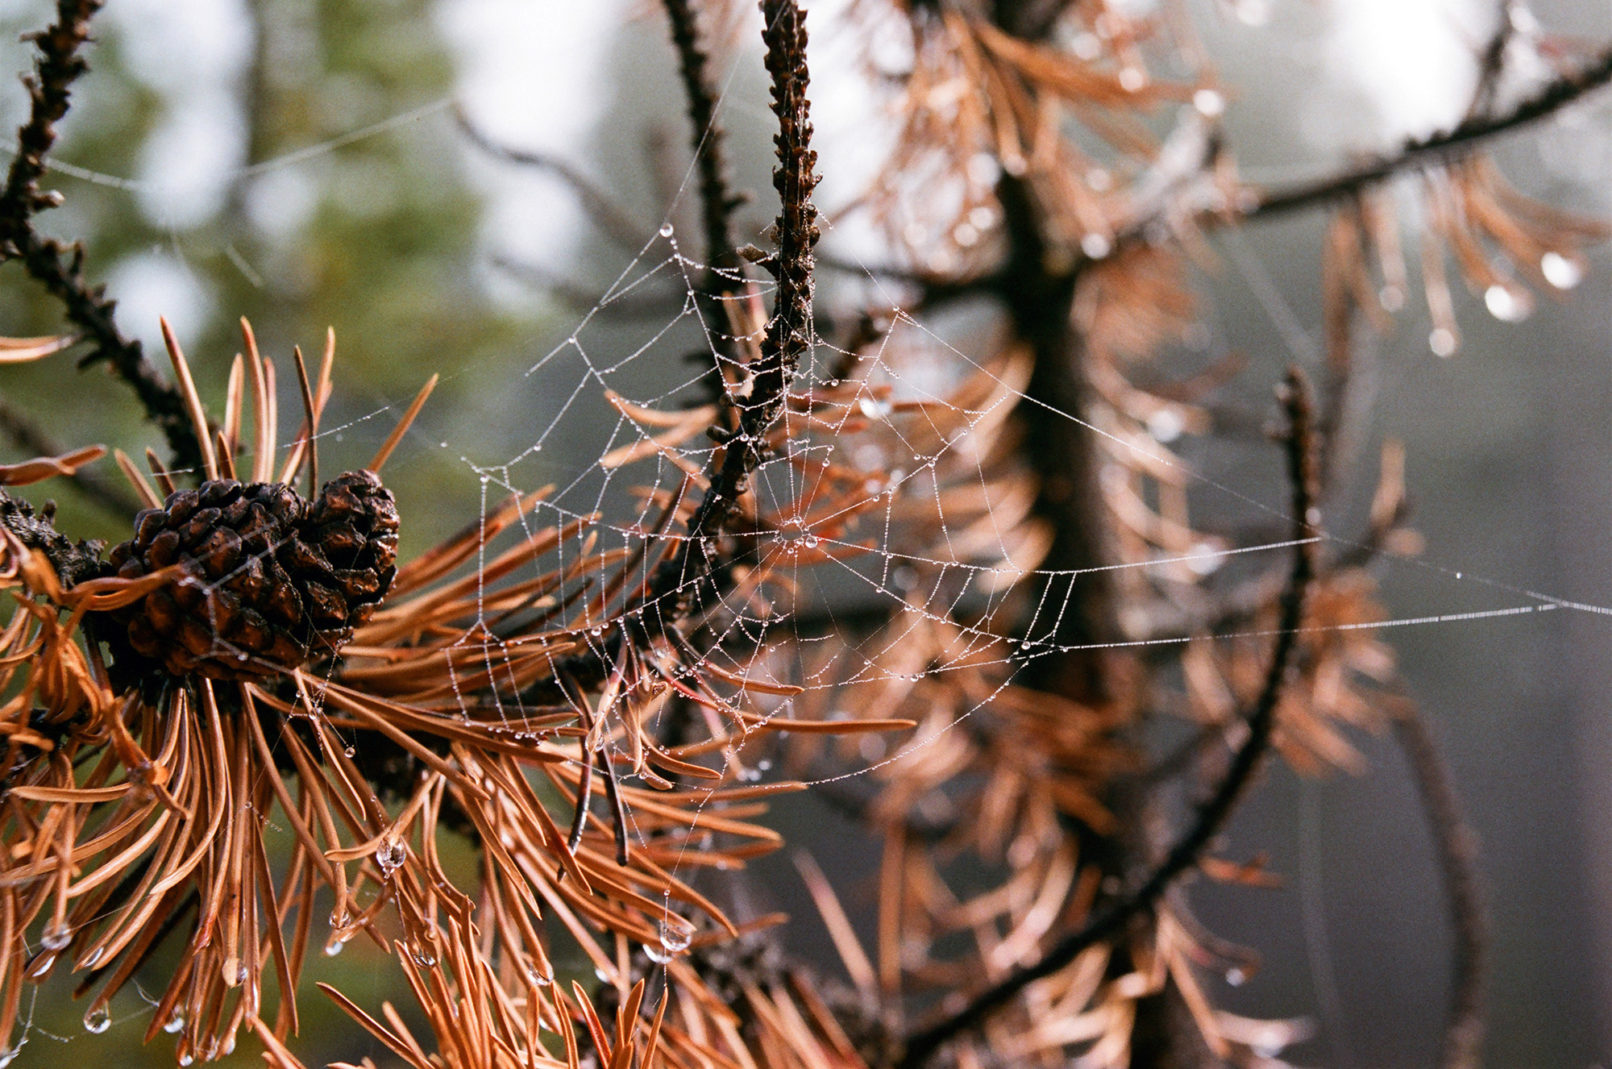 A macro shot of a dew covered spider web reaching across the branches of a pine tree.